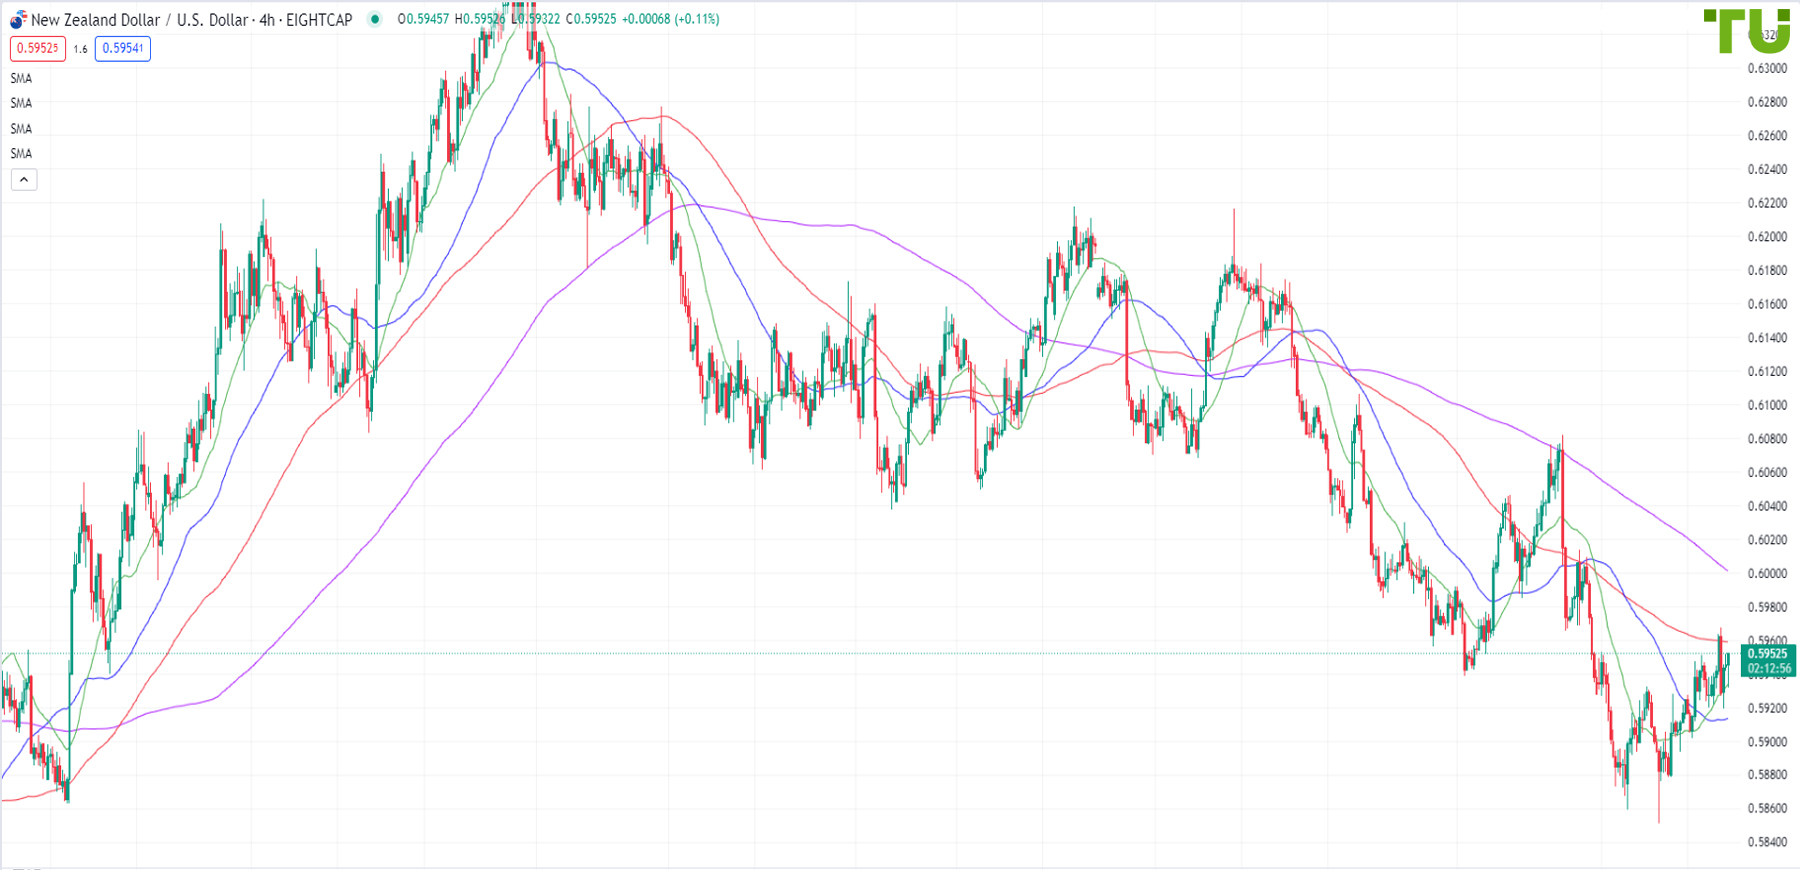 NZD/USD also bought on decline